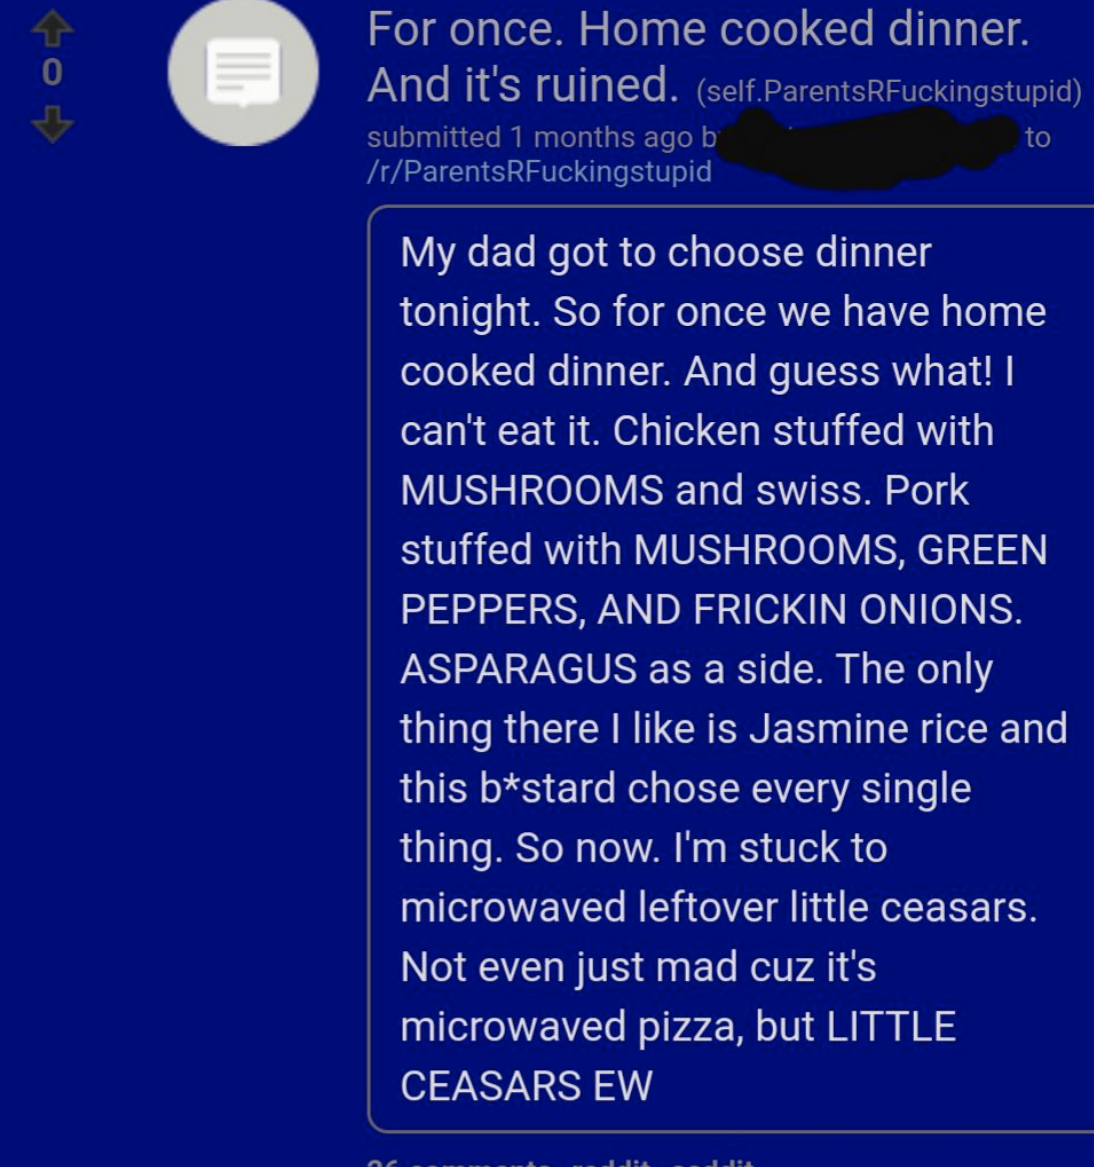 a kid complaining that even though &quot;for once&quot; there&#x27;s a homecooked meal it&#x27;s all stuff he doesn&#x27;t like so he&#x27;s forced to eat leftover Little Caesars